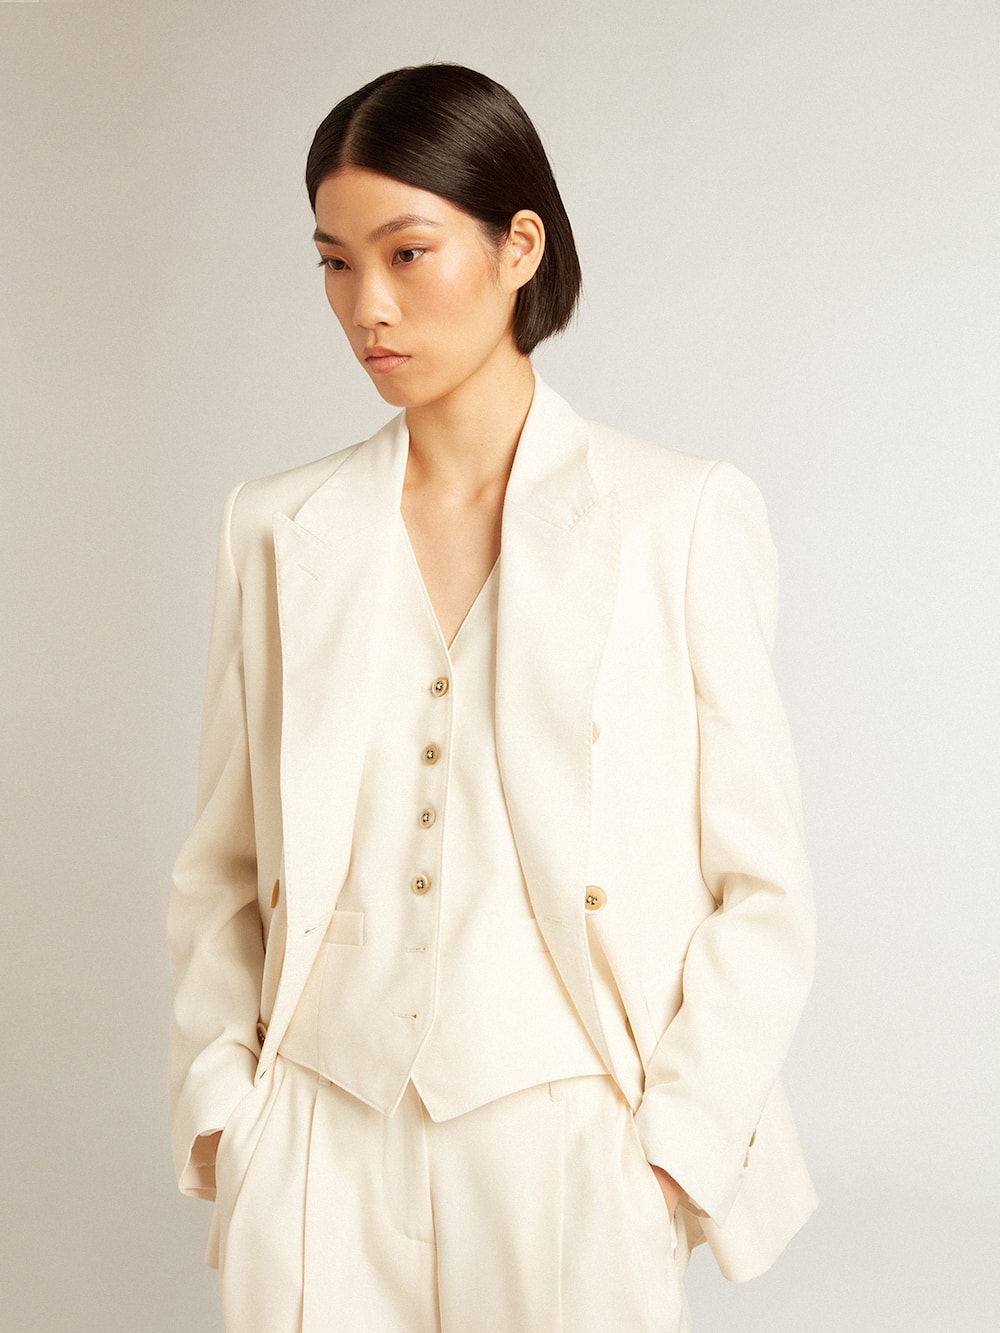 Golden Goose - Women’s aged white double-breasted blazer in 